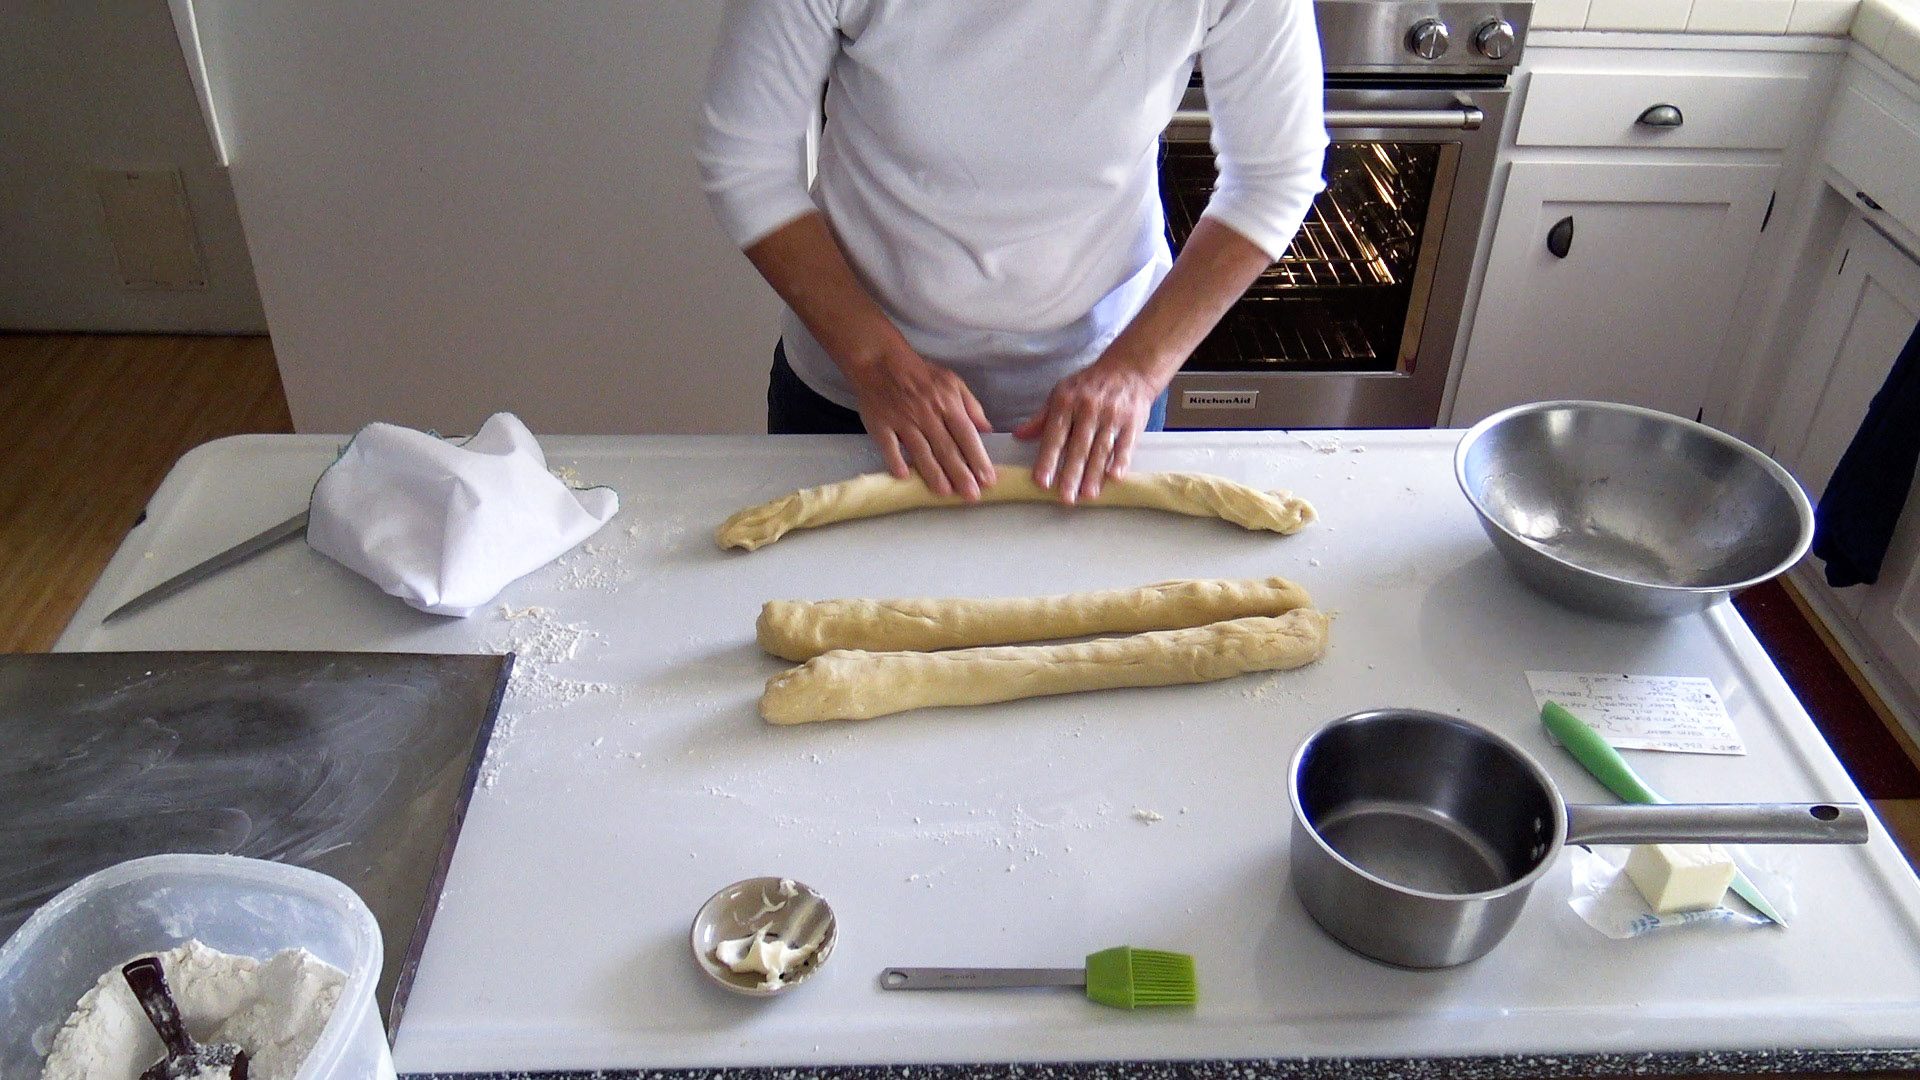 Ben upgrades his mother's oven and shares her bread recipe. Full instructions at HomeMade-Modern.com